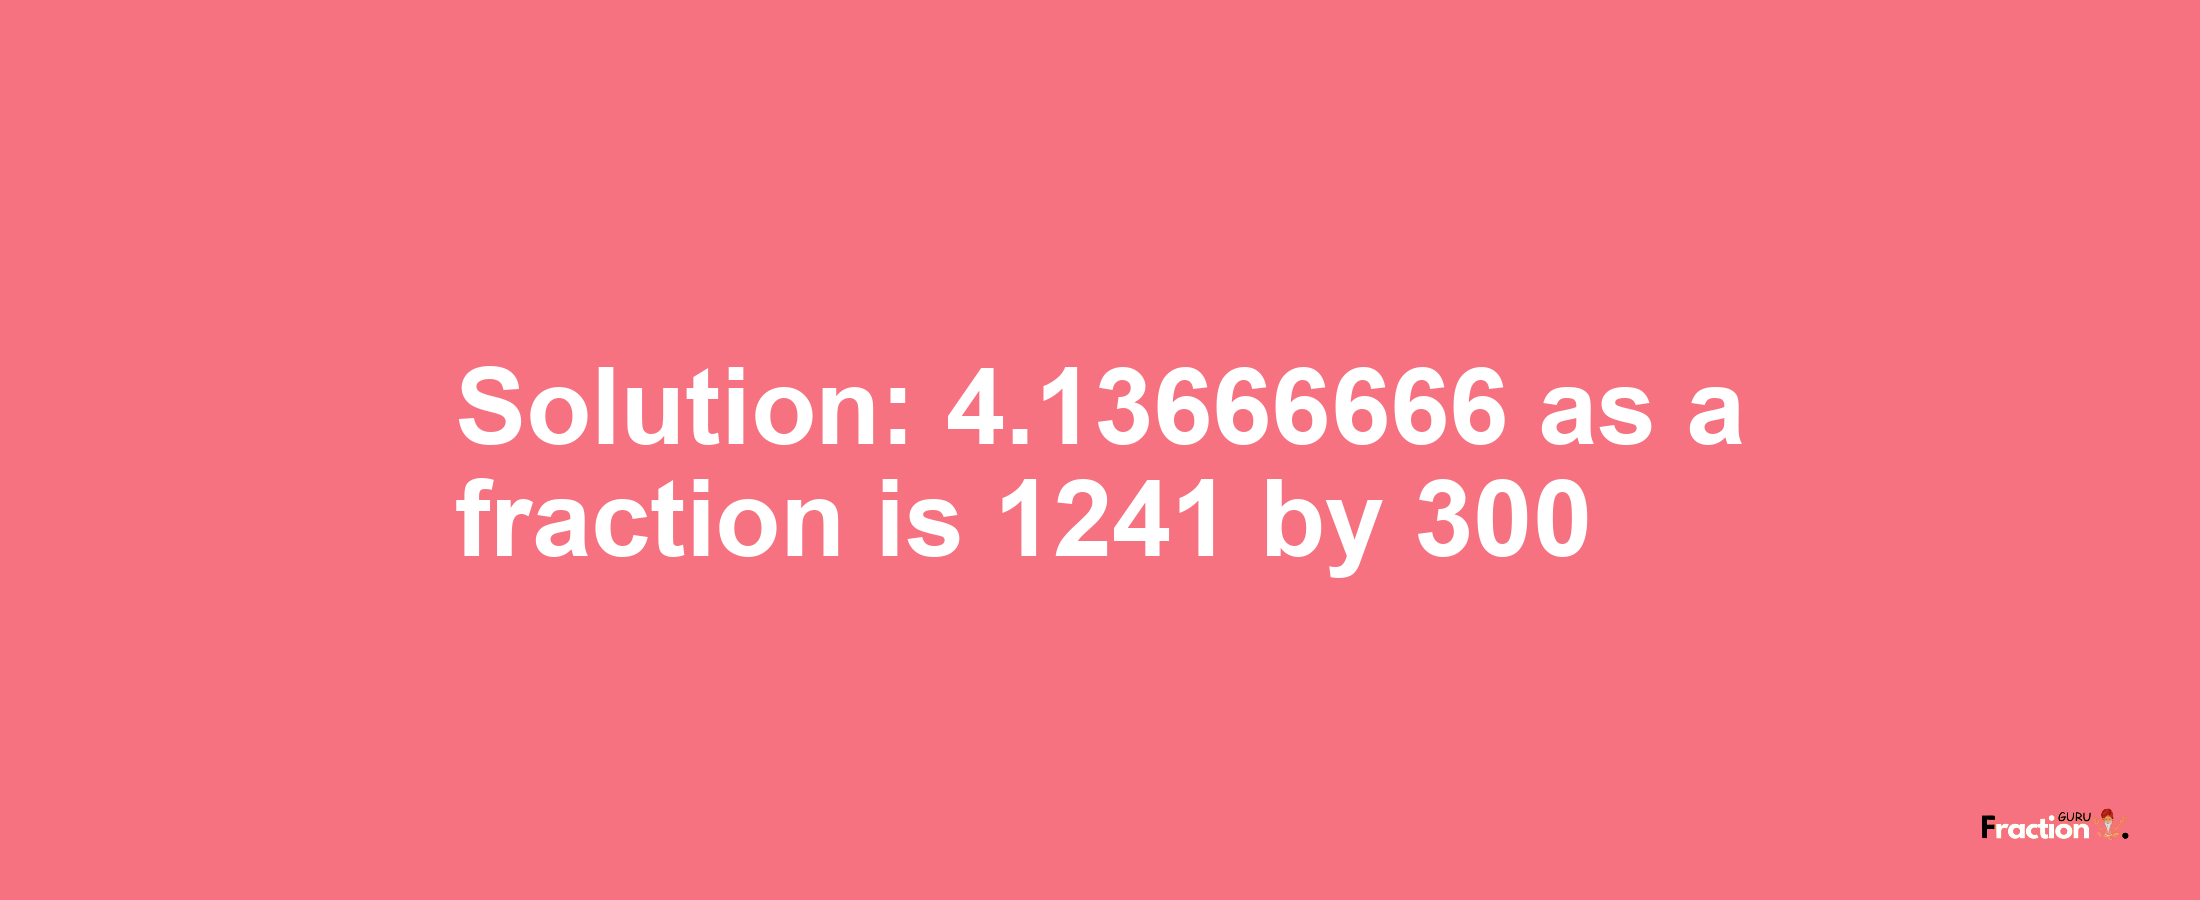 Solution:4.13666666 as a fraction is 1241/300